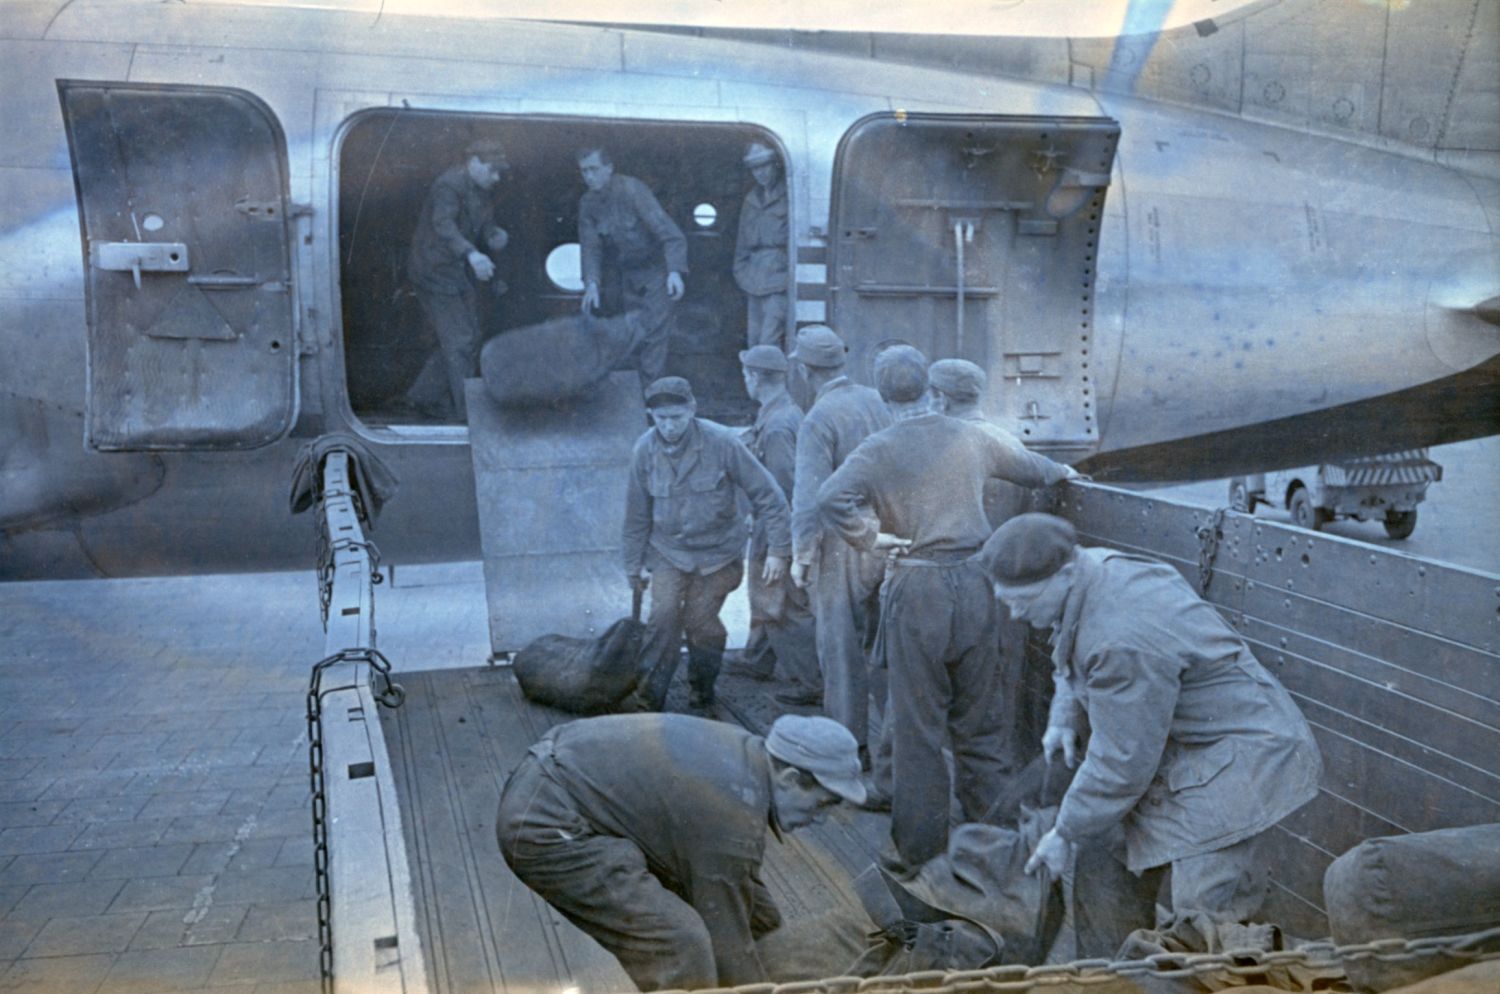 Enlarge photo: Men are unloading cargo bags from an airplane.